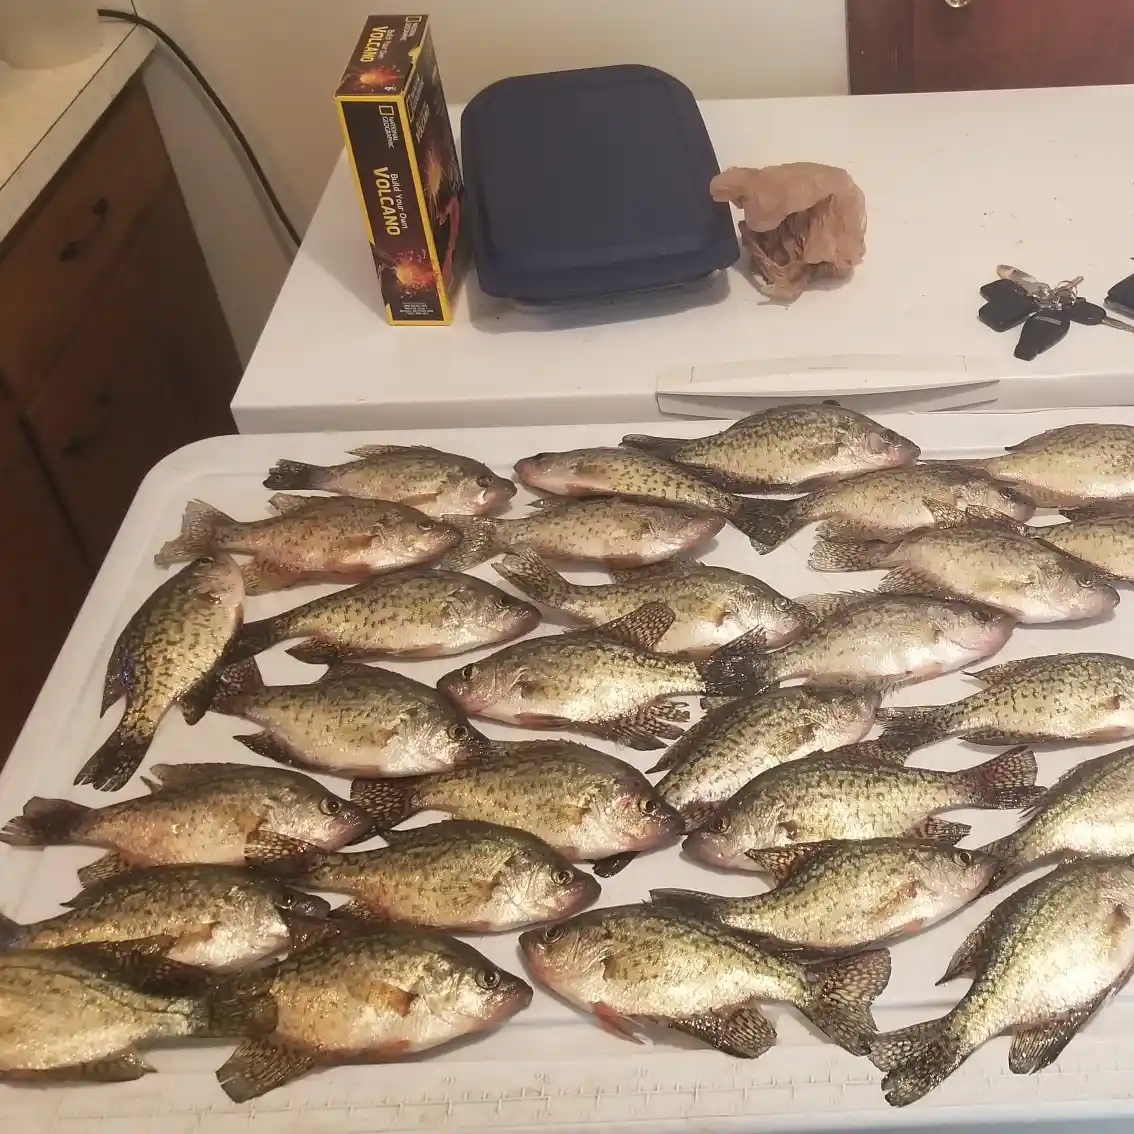 NWA fishing report: Water clarity varies from Beaver Lake headwaters to the  dam